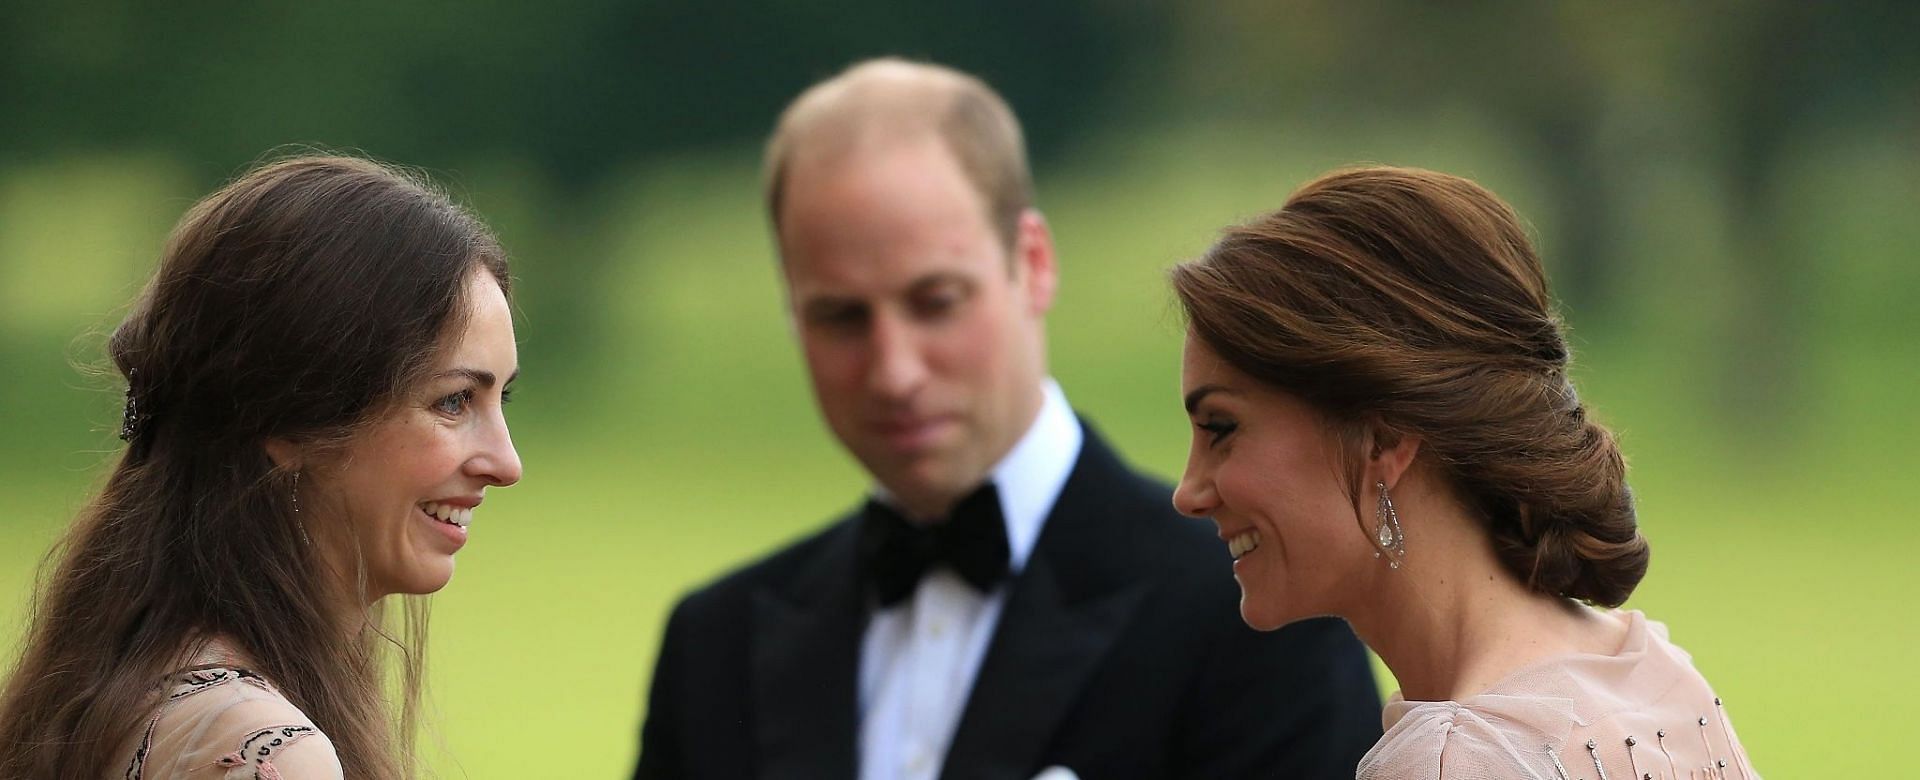 The rumored controversy between Prince William and Rose Hanbury took place in 2019 (Image via Stephen Pond/Getty Images)